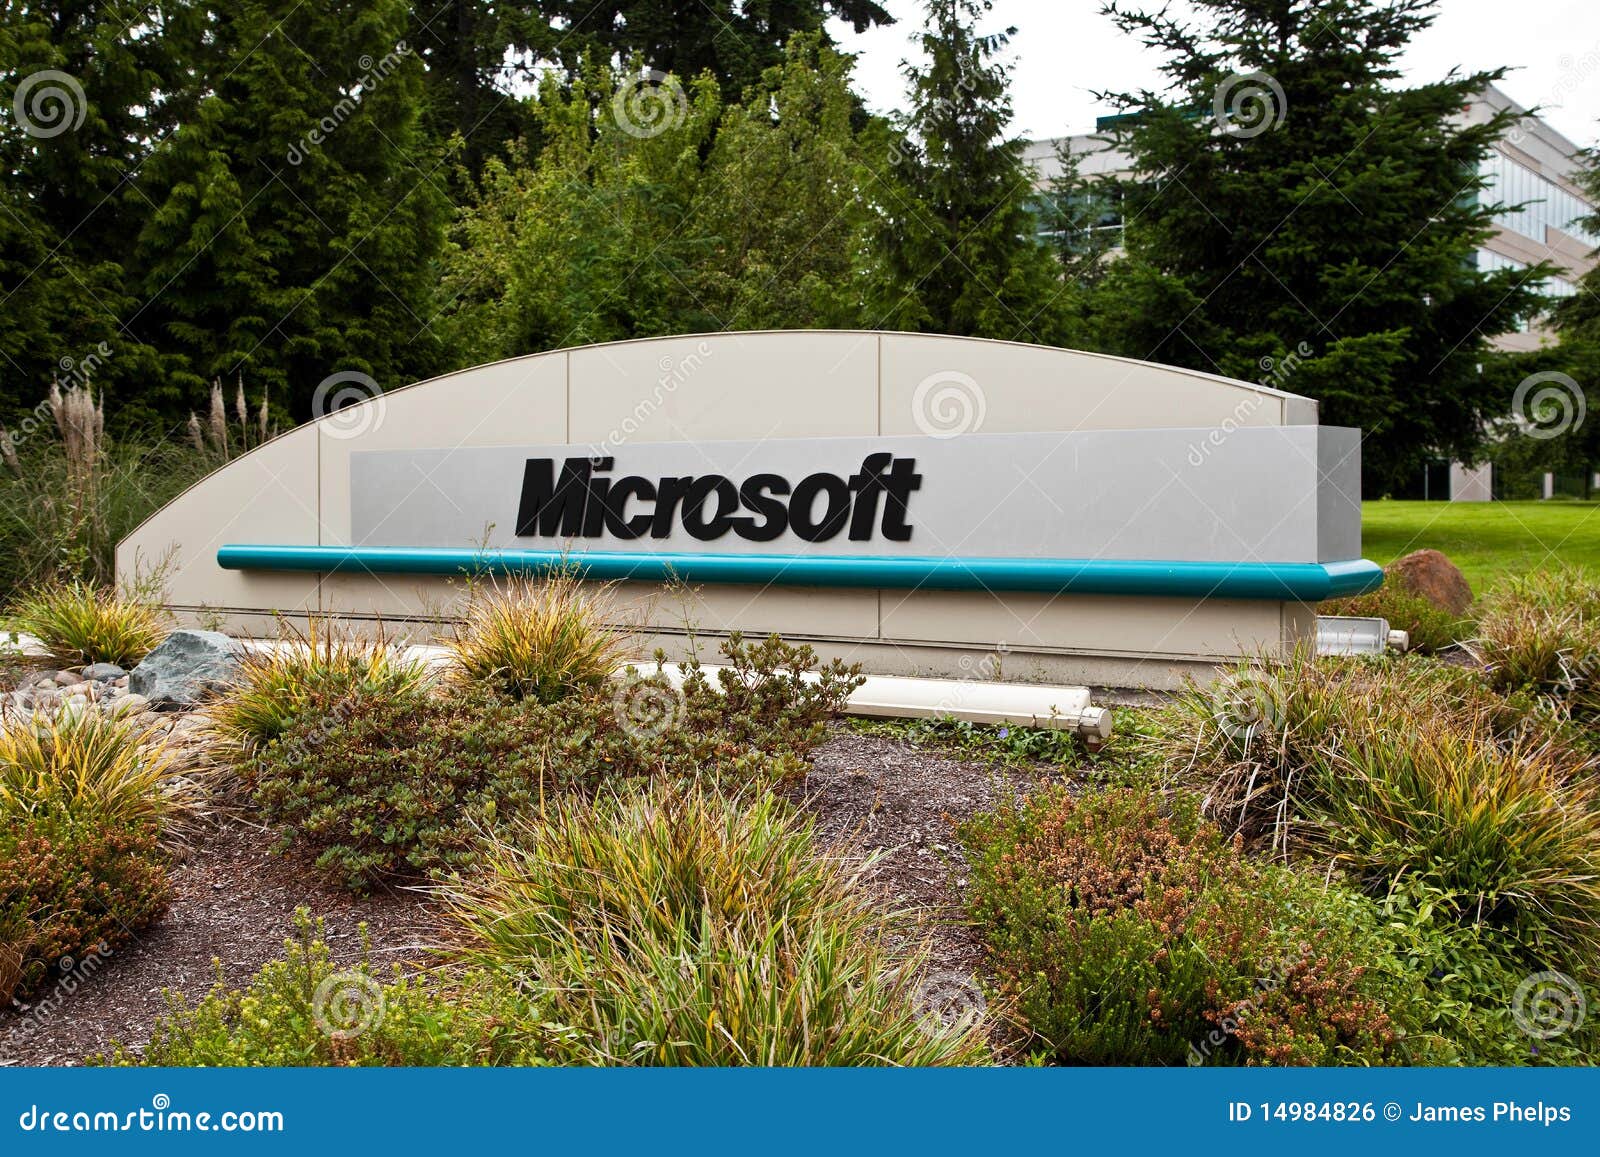 microsoft clipart discontinued - photo #45